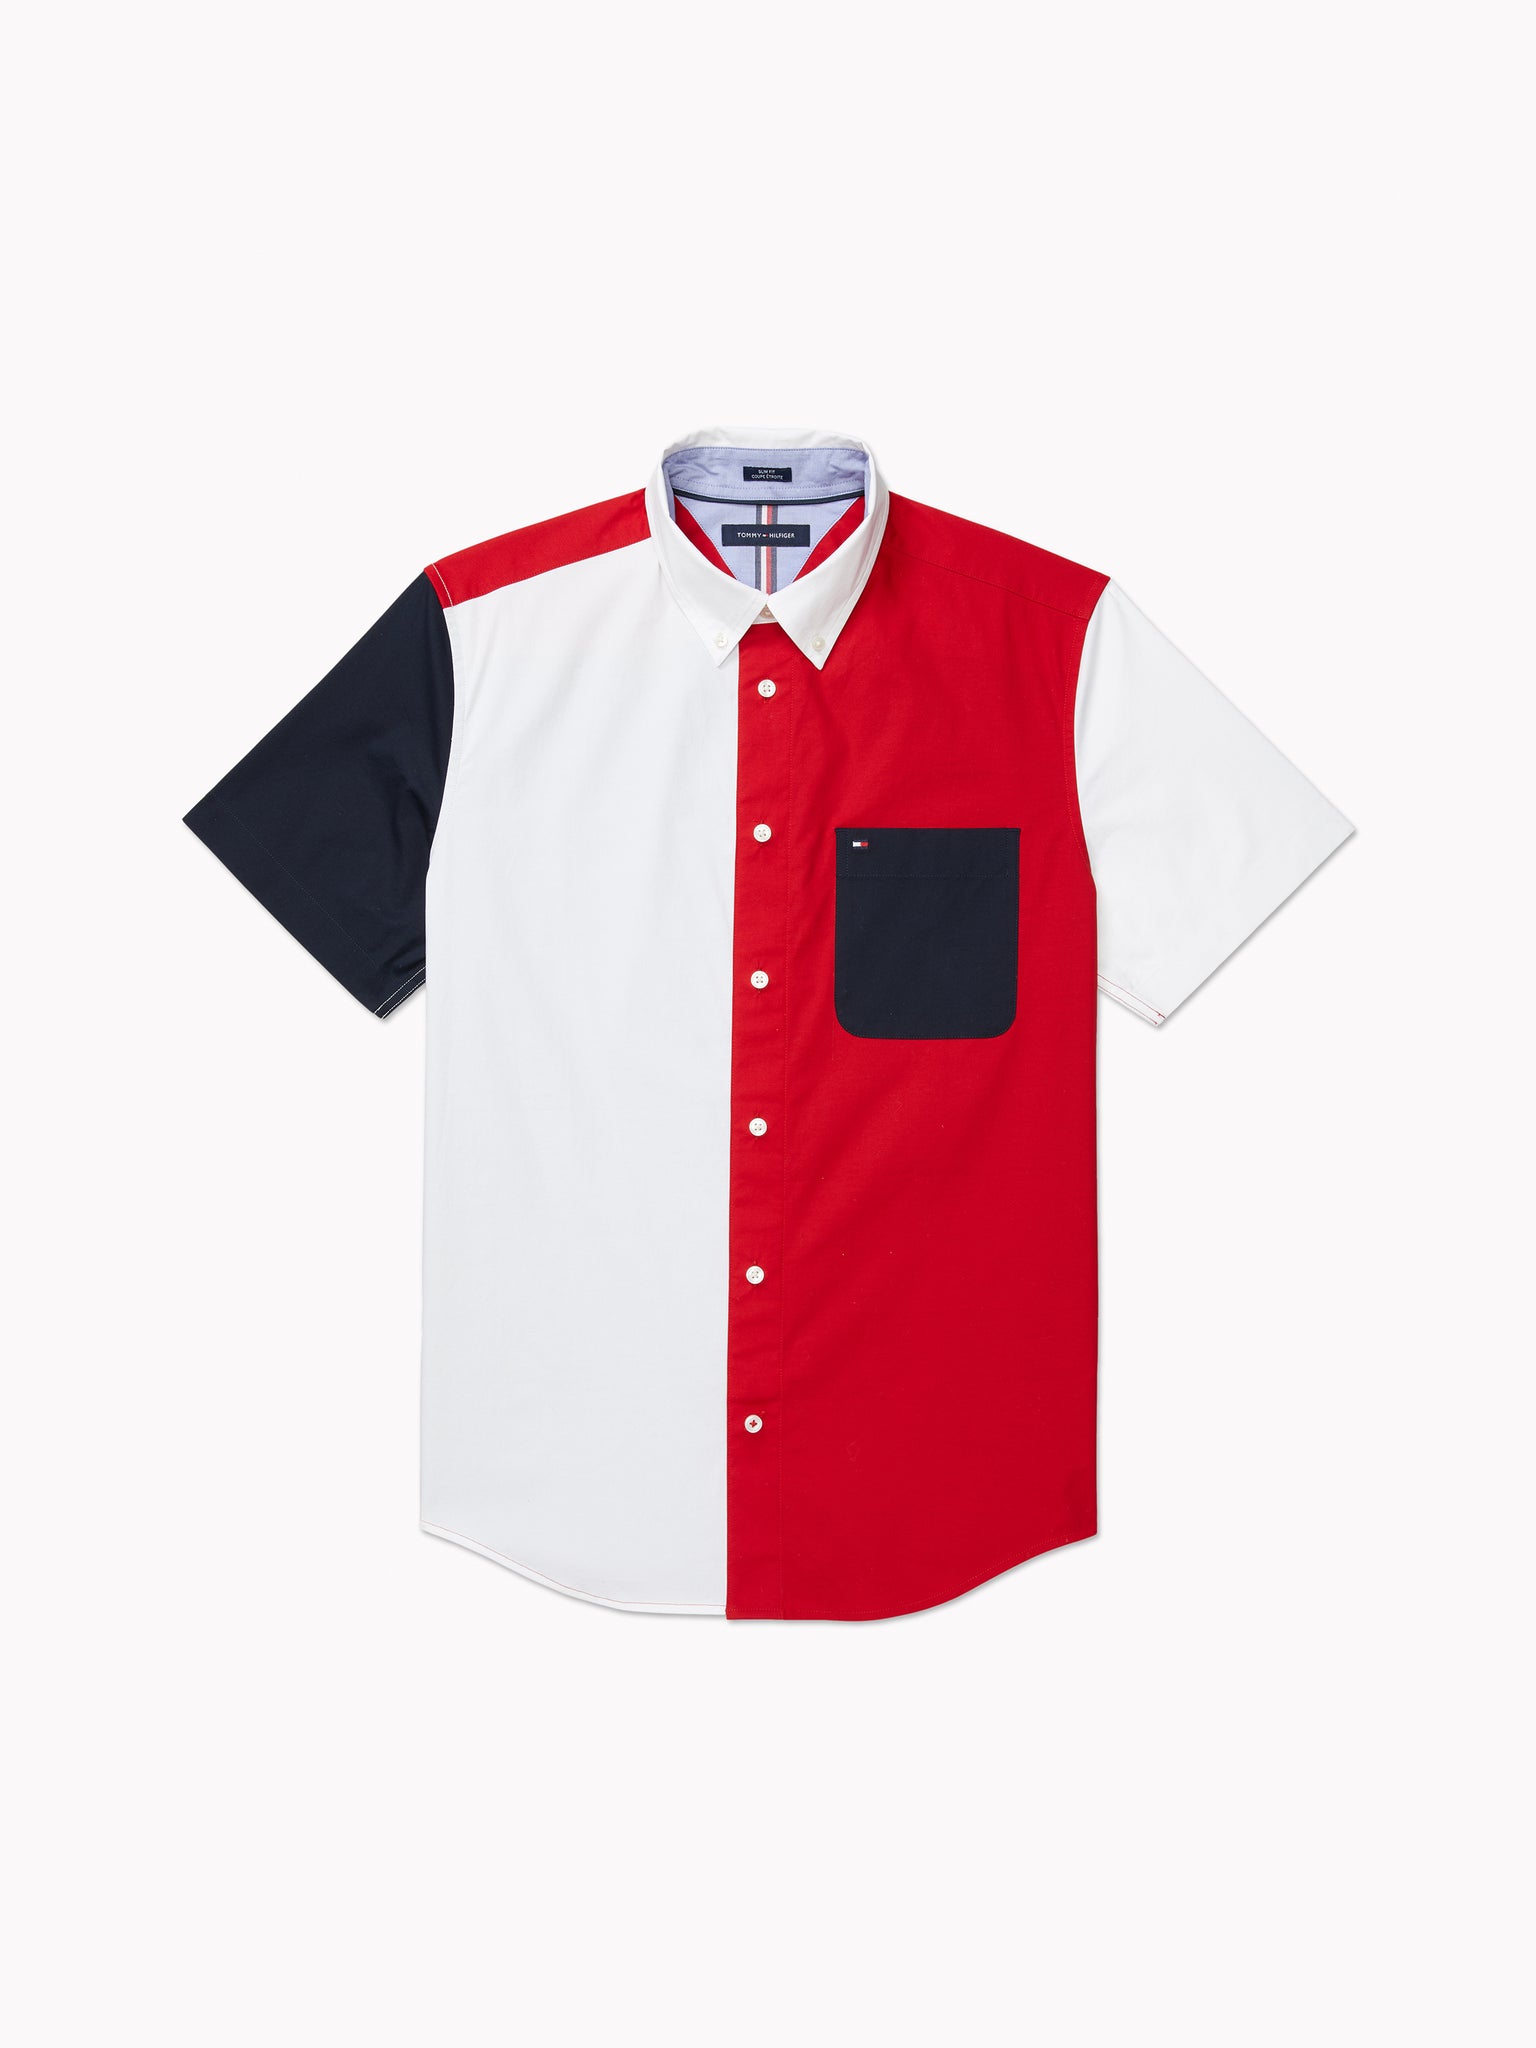 Rush Pieced Short Sleeved Shirt (Mens) - Primary Red